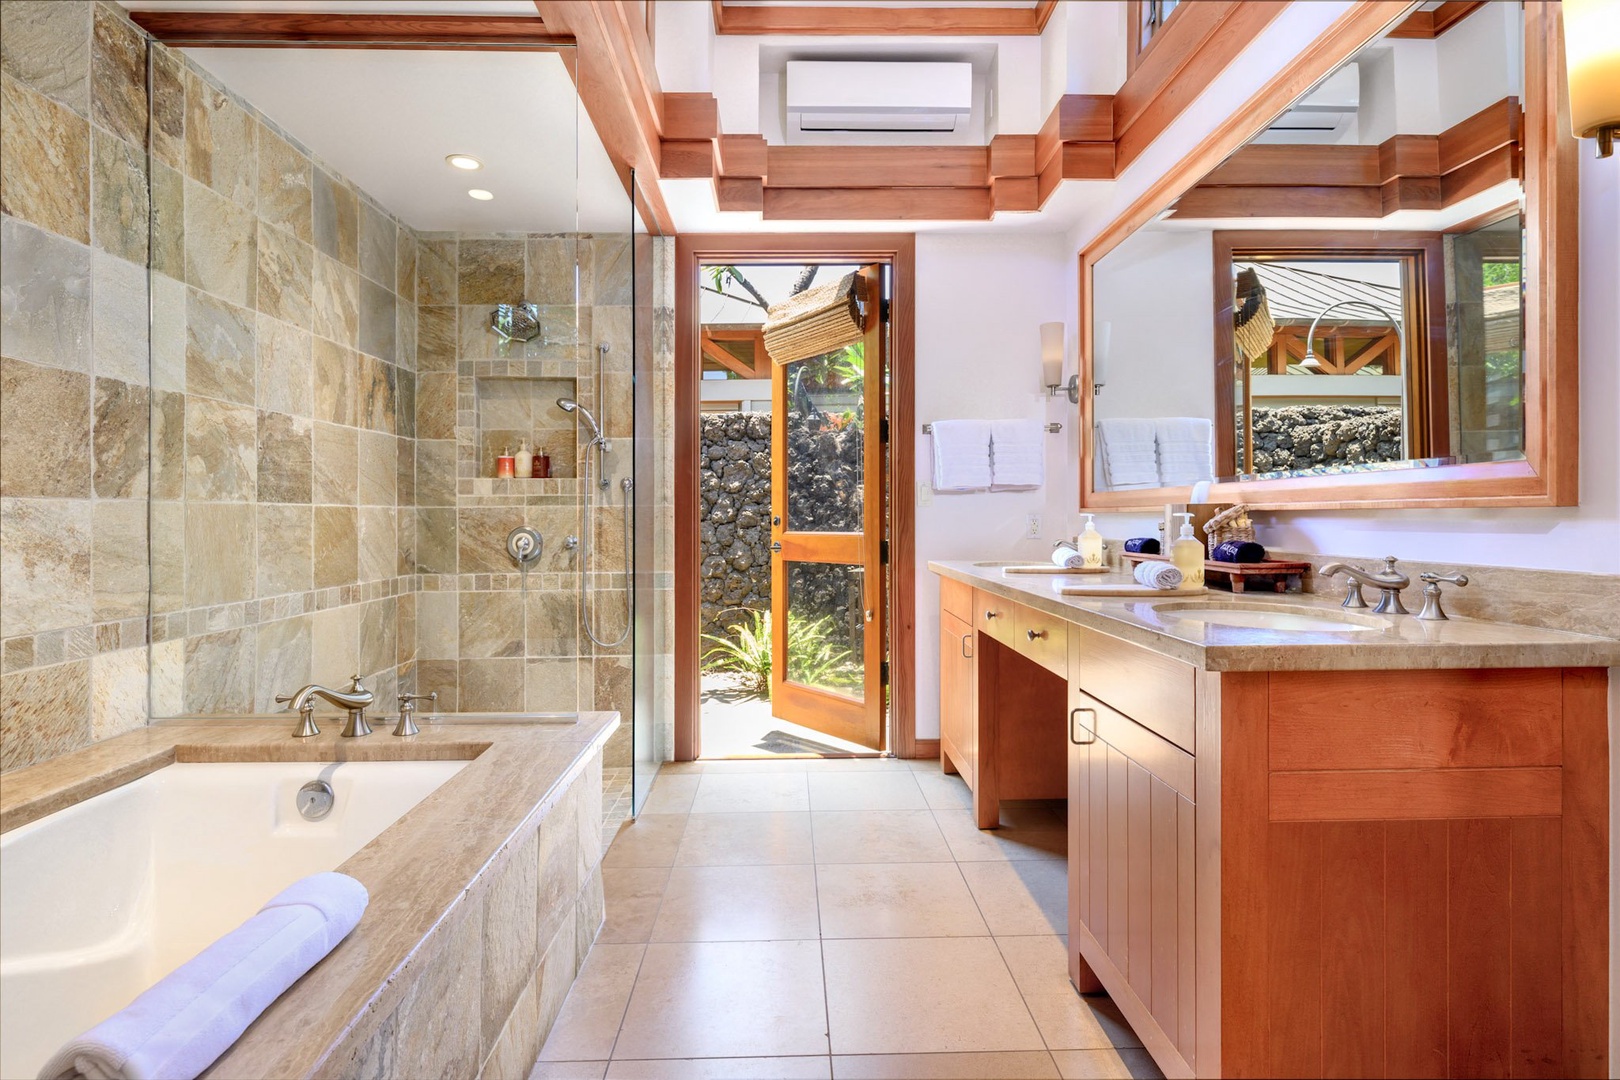 Kamuela Vacation Rentals, 3BD Na Hale 3 at Pauoa Beach Club at Mauna Lani Resort - The ensuite bathroom feature a soaker tub and shower, providing a spa-like experience for all guests.